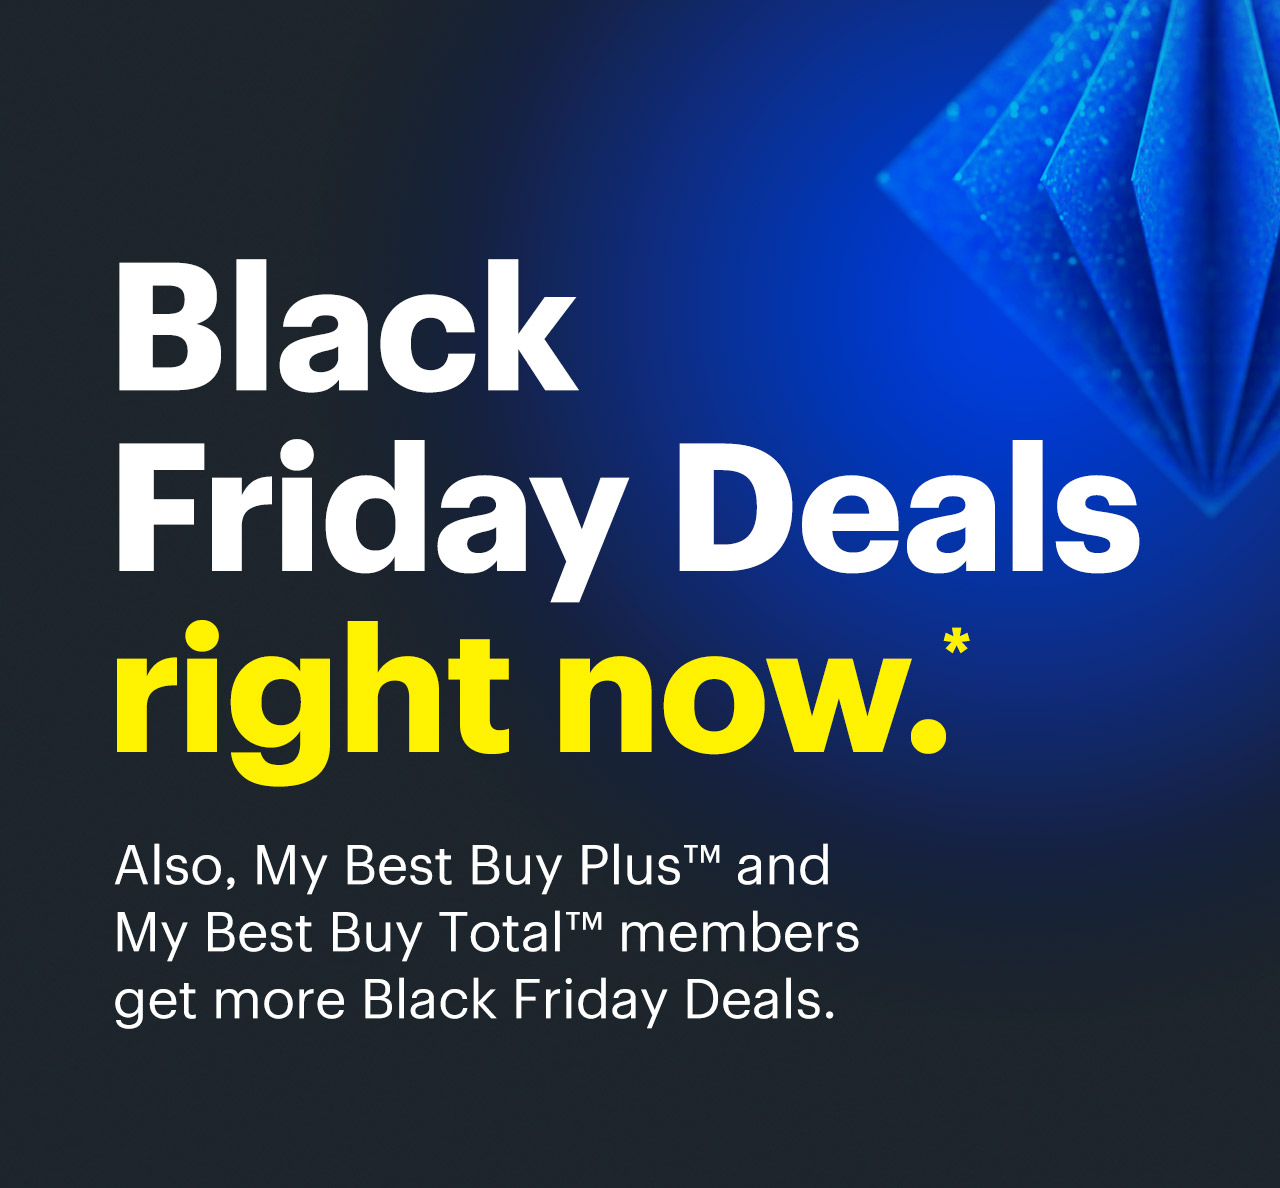 Black Friday Deals right now. Also, My Best Buy Plus™ and My Best Buy Total™ members get more Black Friday Deals. Shop now. Reference disclaimer.